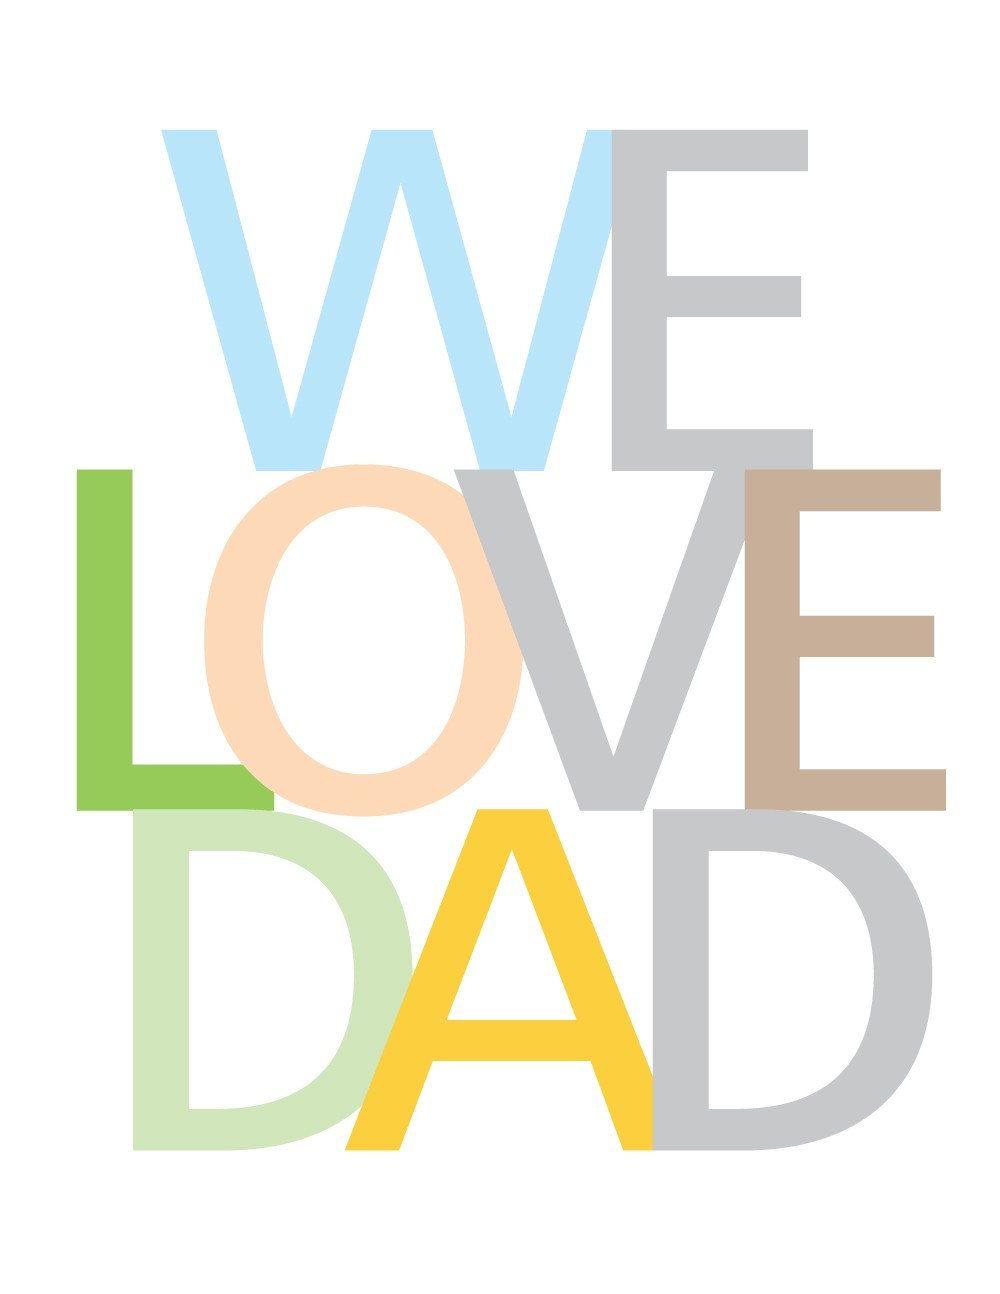 Best image about dad things. My everything, Dads